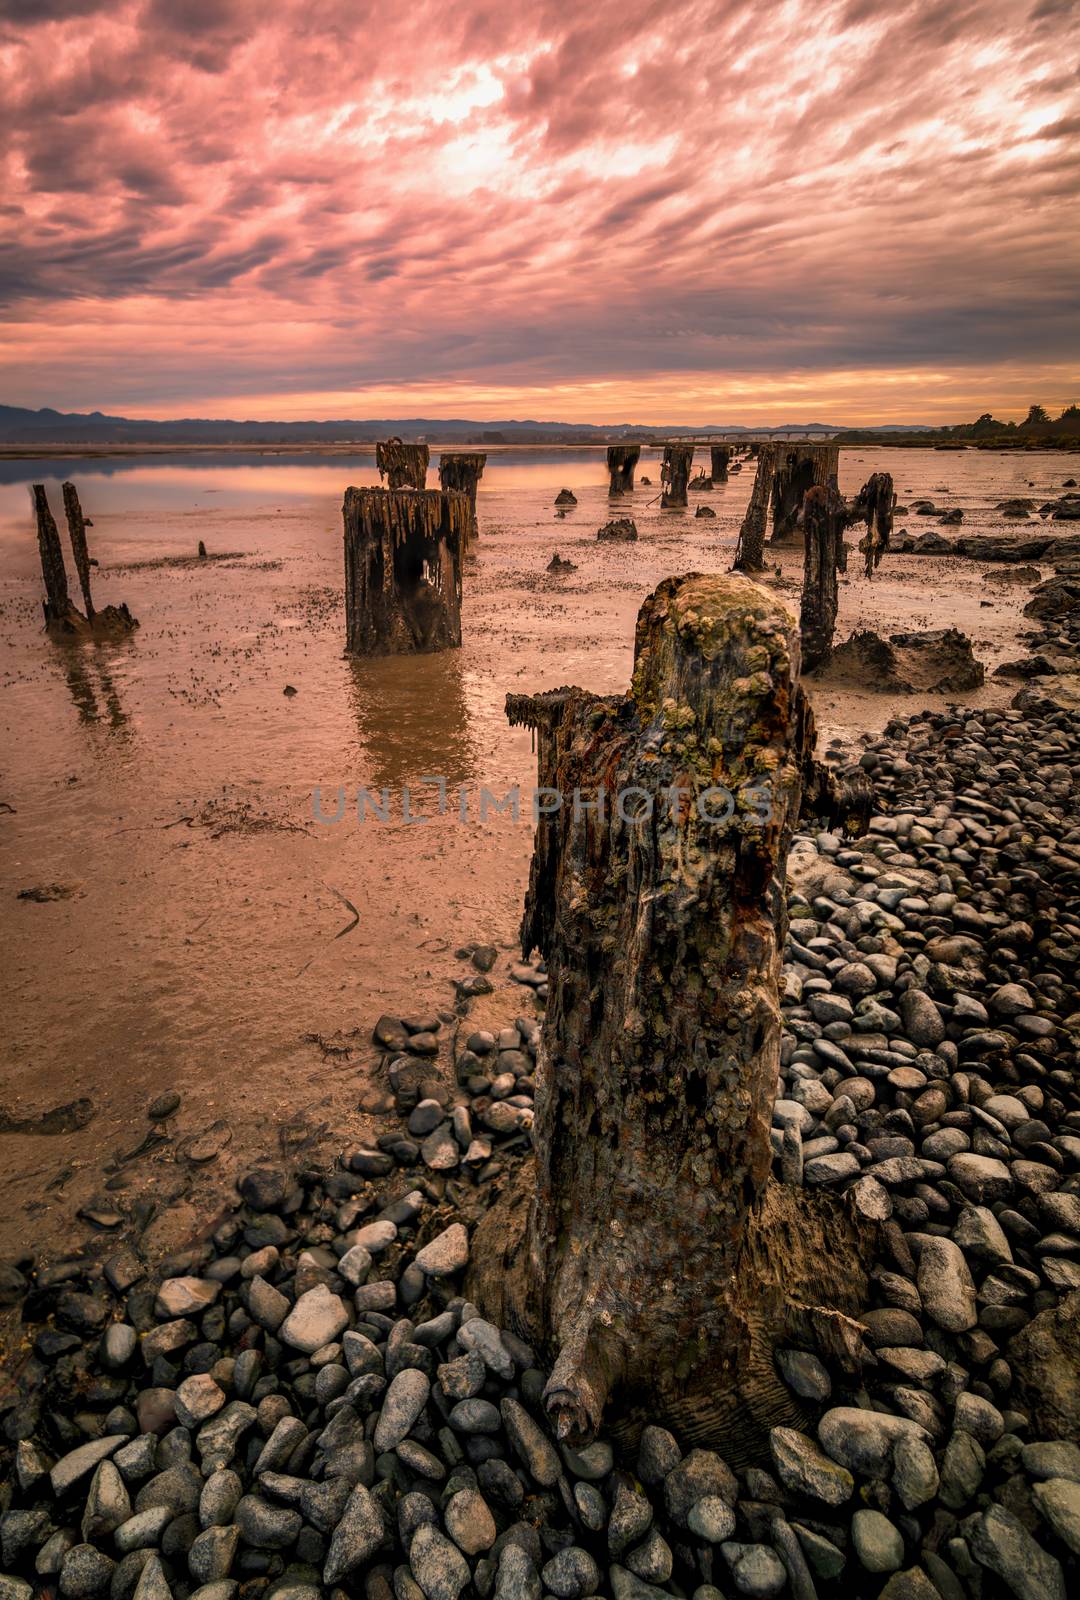 Sunset shot over old pier posts which once held the old wharf over Humboldt Bay, California.